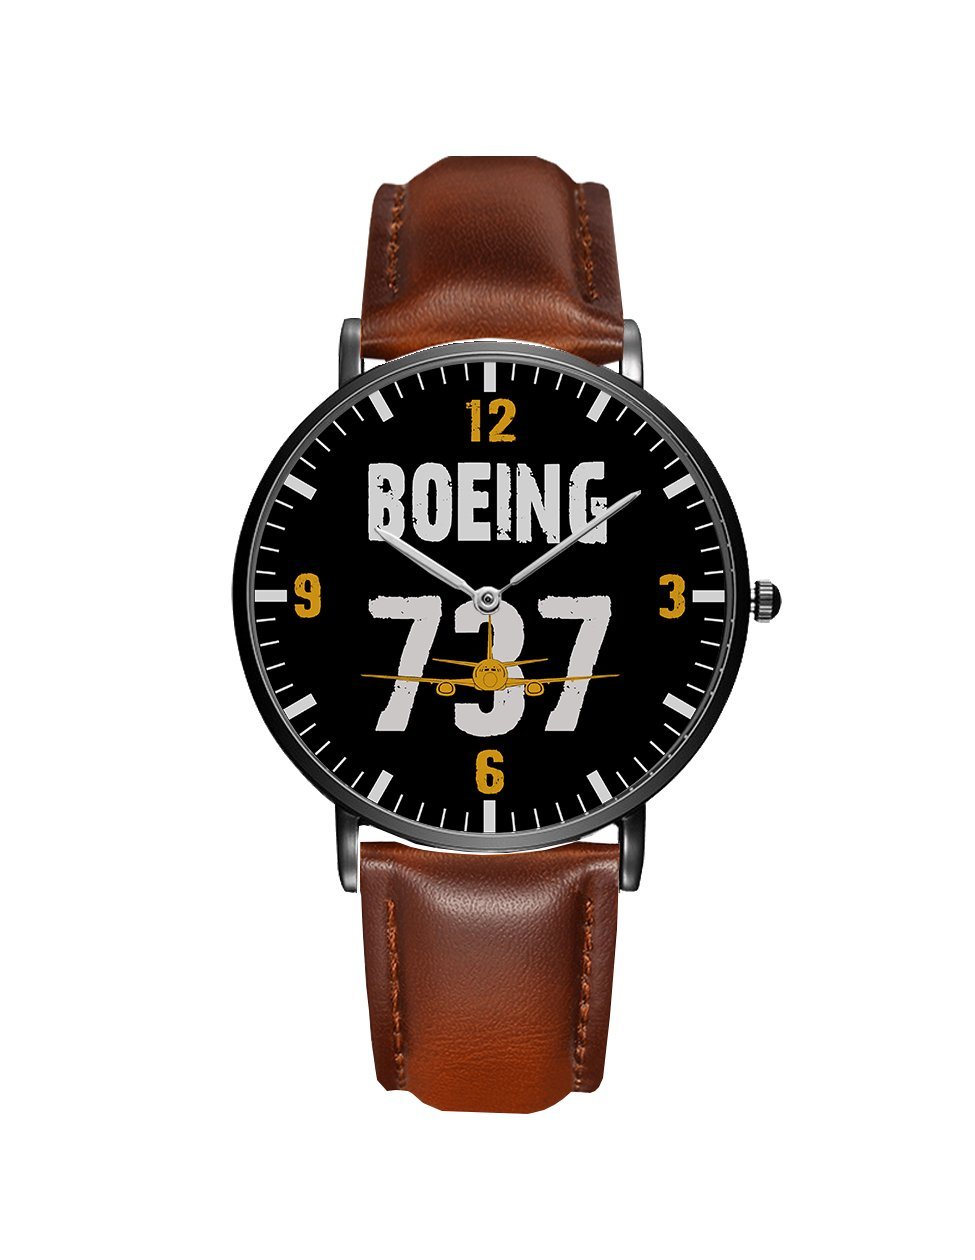 Boeing 737 Designed Leather Strap Watches Pilot Eyes Store Black & Brown Leather Strap 